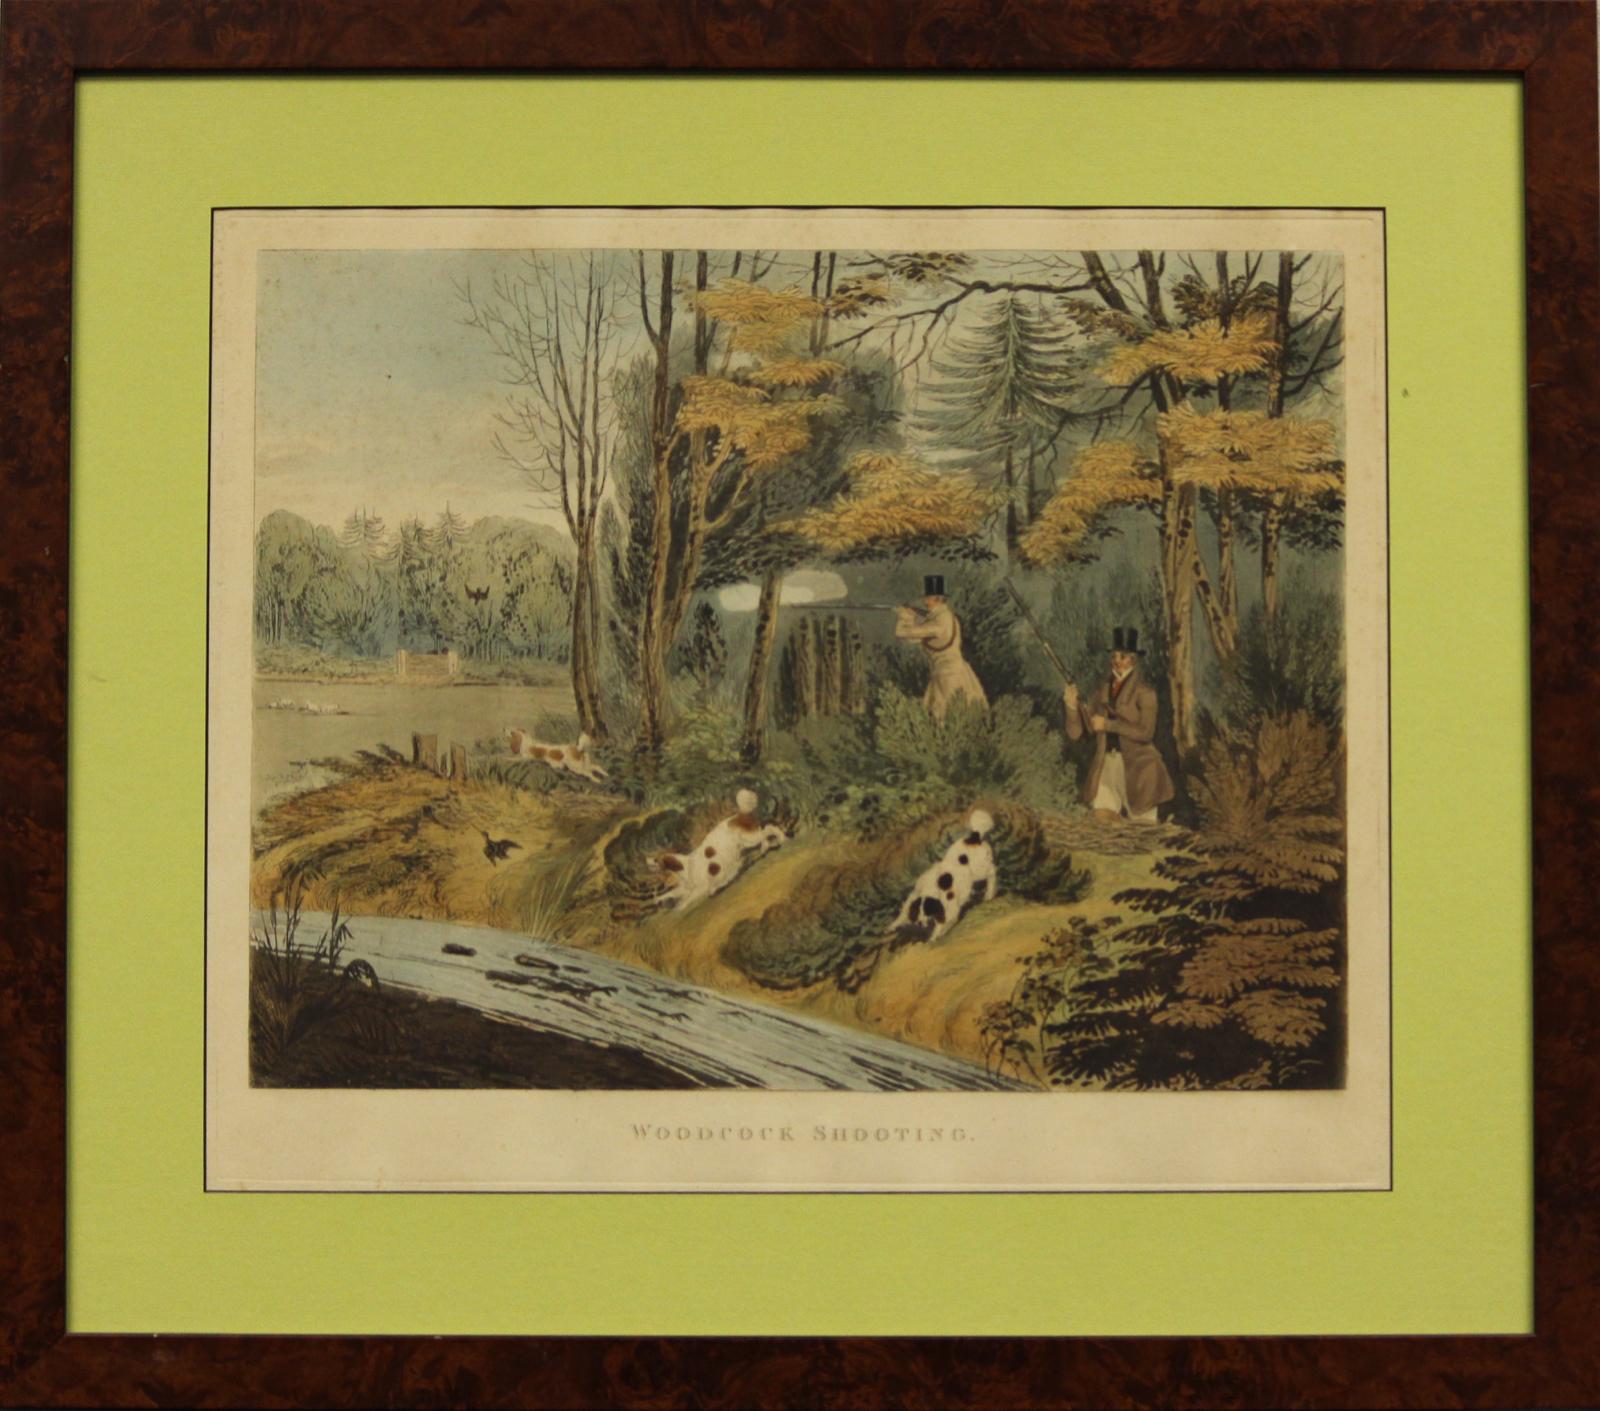 Woodcock Shooting - Print by Unknown